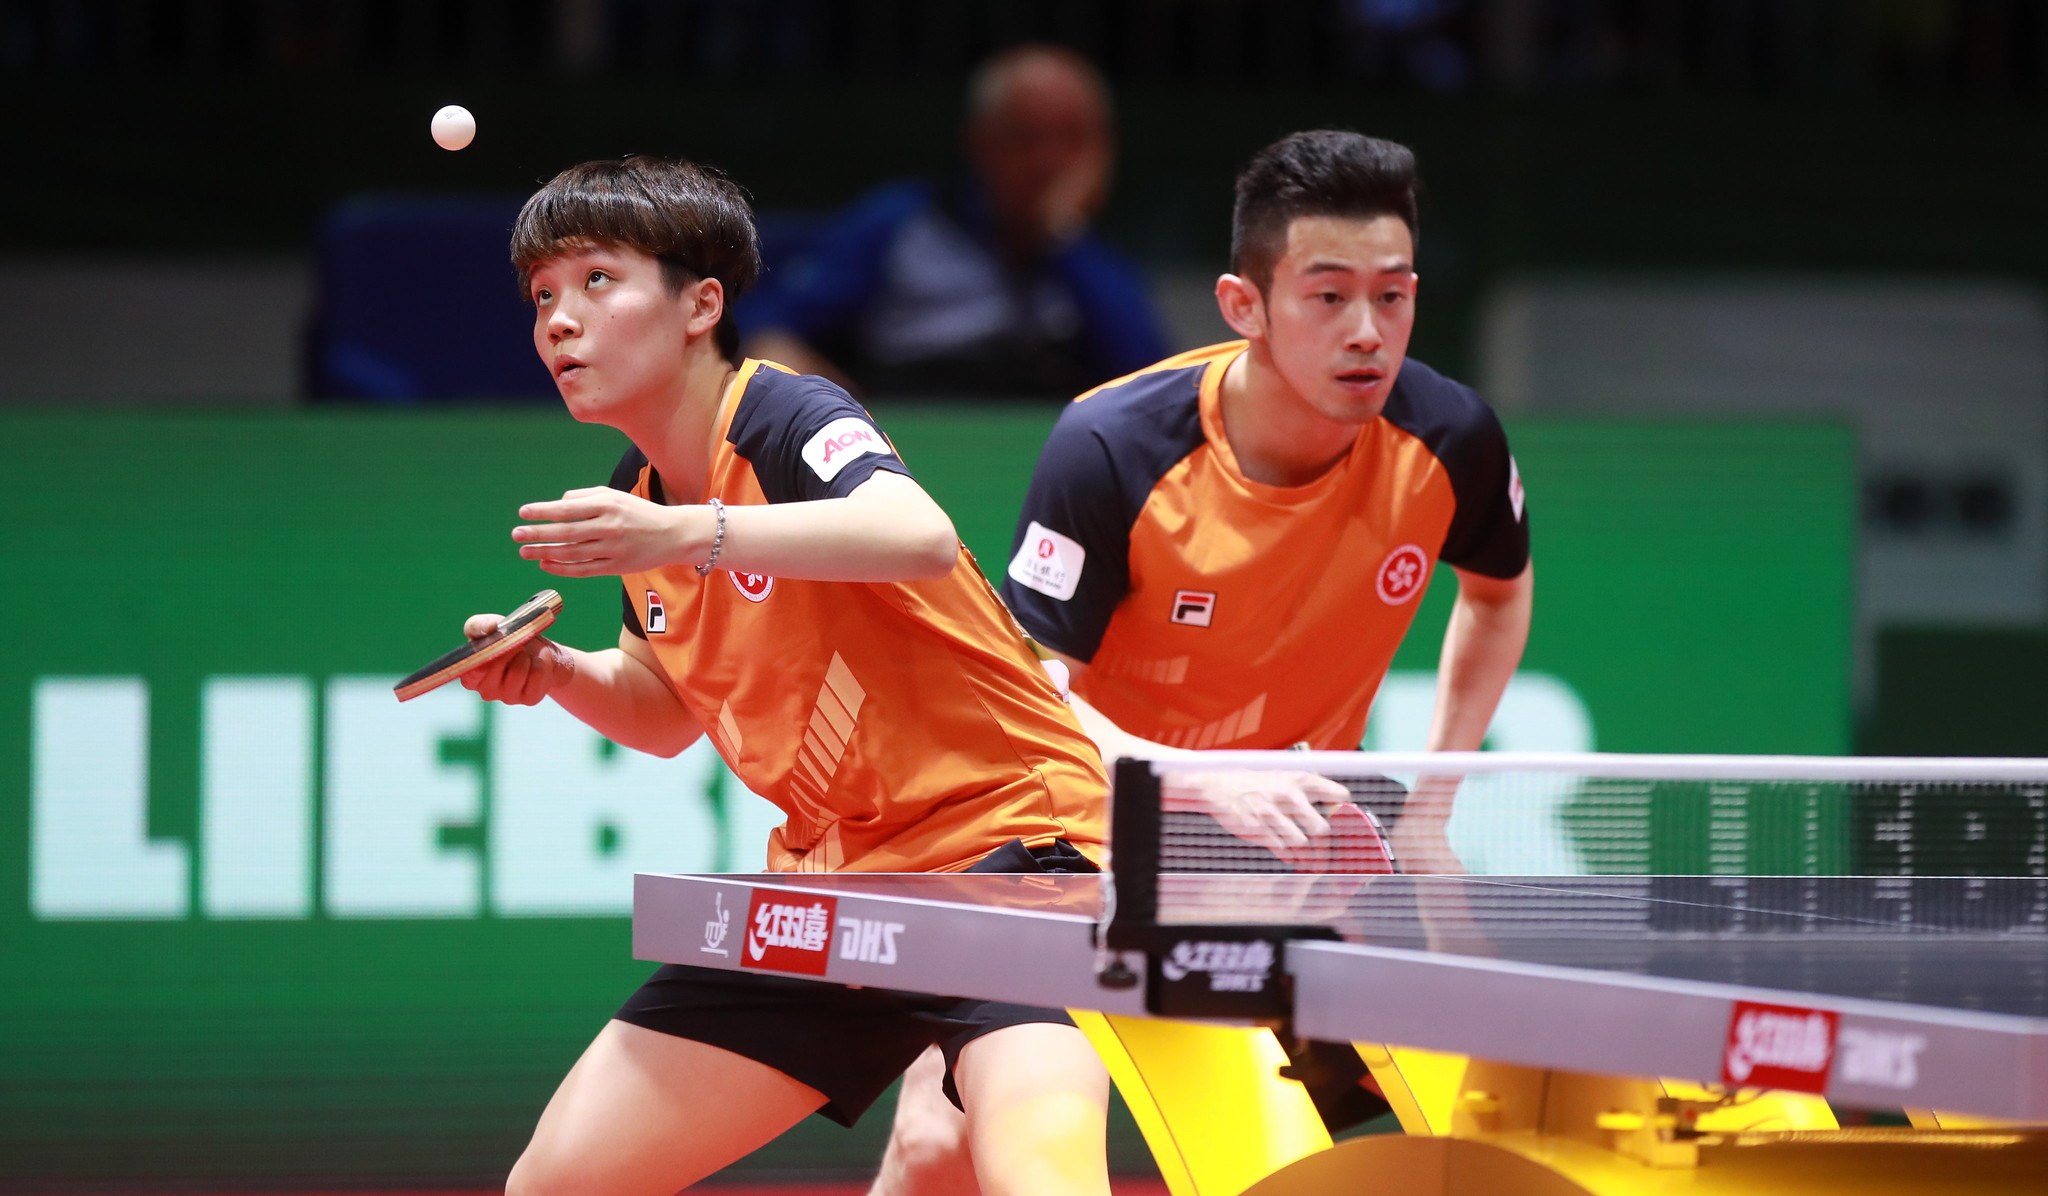 See The World's Top Table-tennis Stars In Action - Ping Pong Budapest , HD Wallpaper & Backgrounds